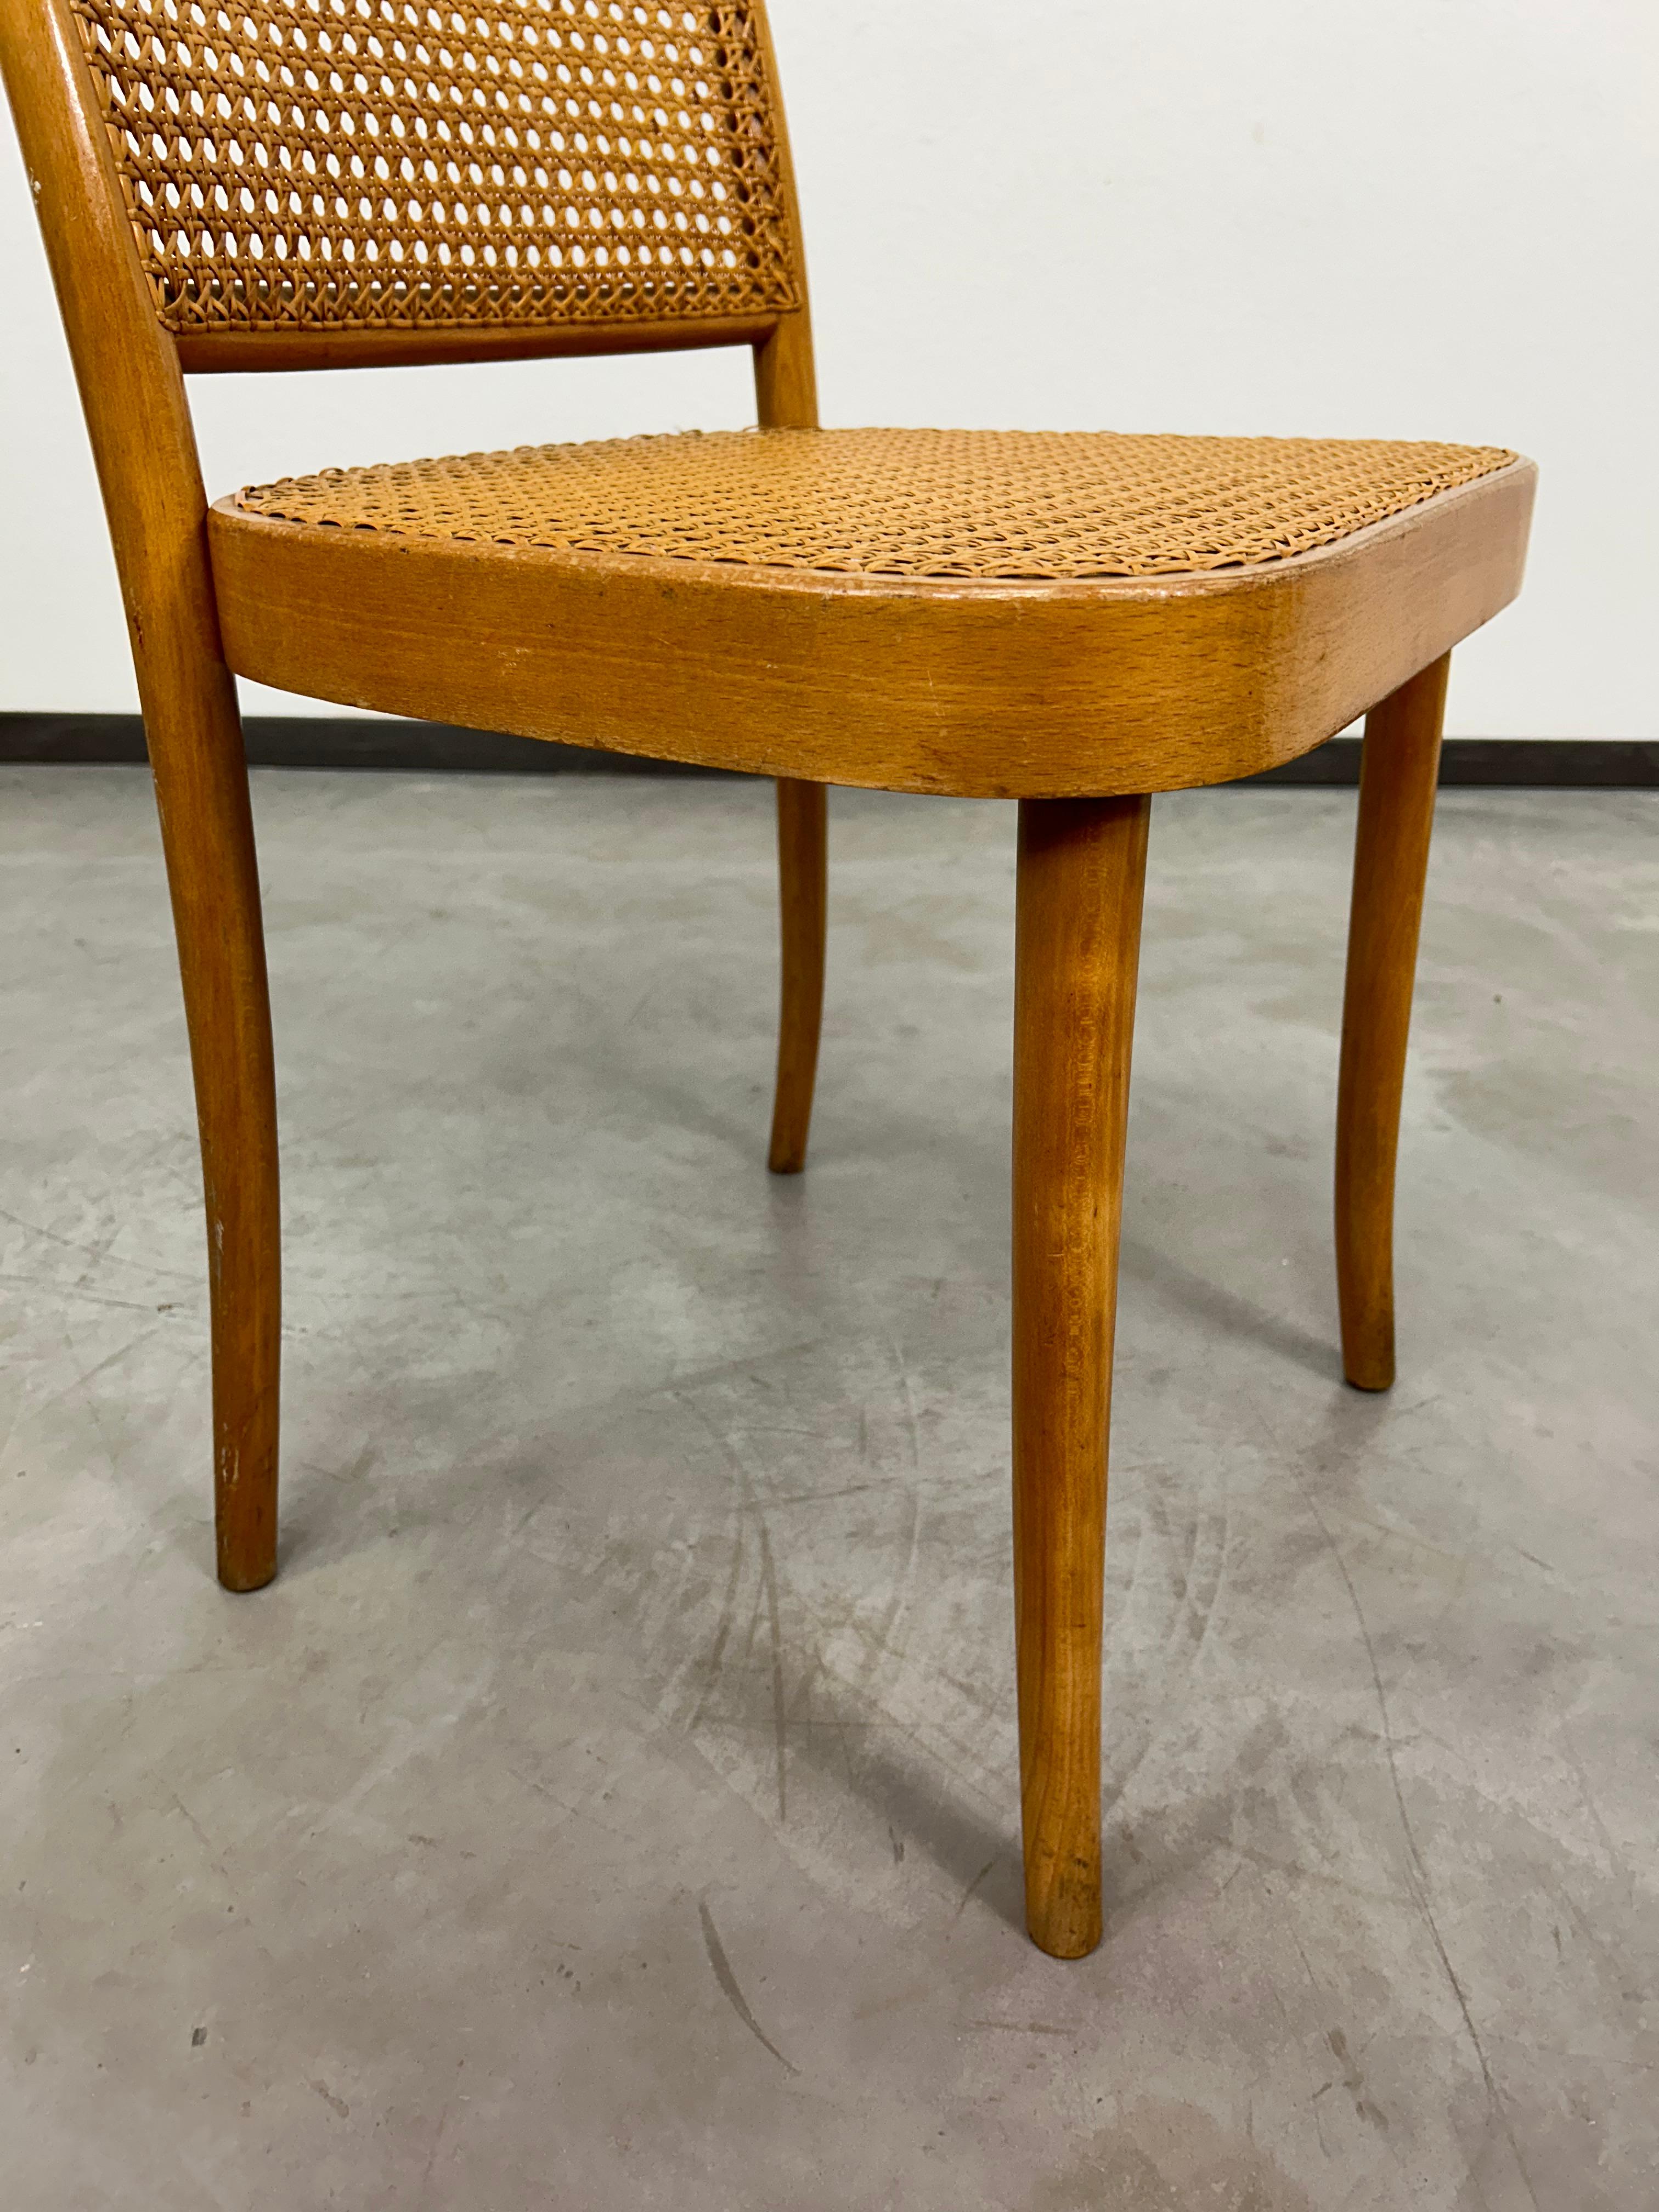 Mid-20th Century Bauhaus chair no.811 by Josef Hoffmann For Sale